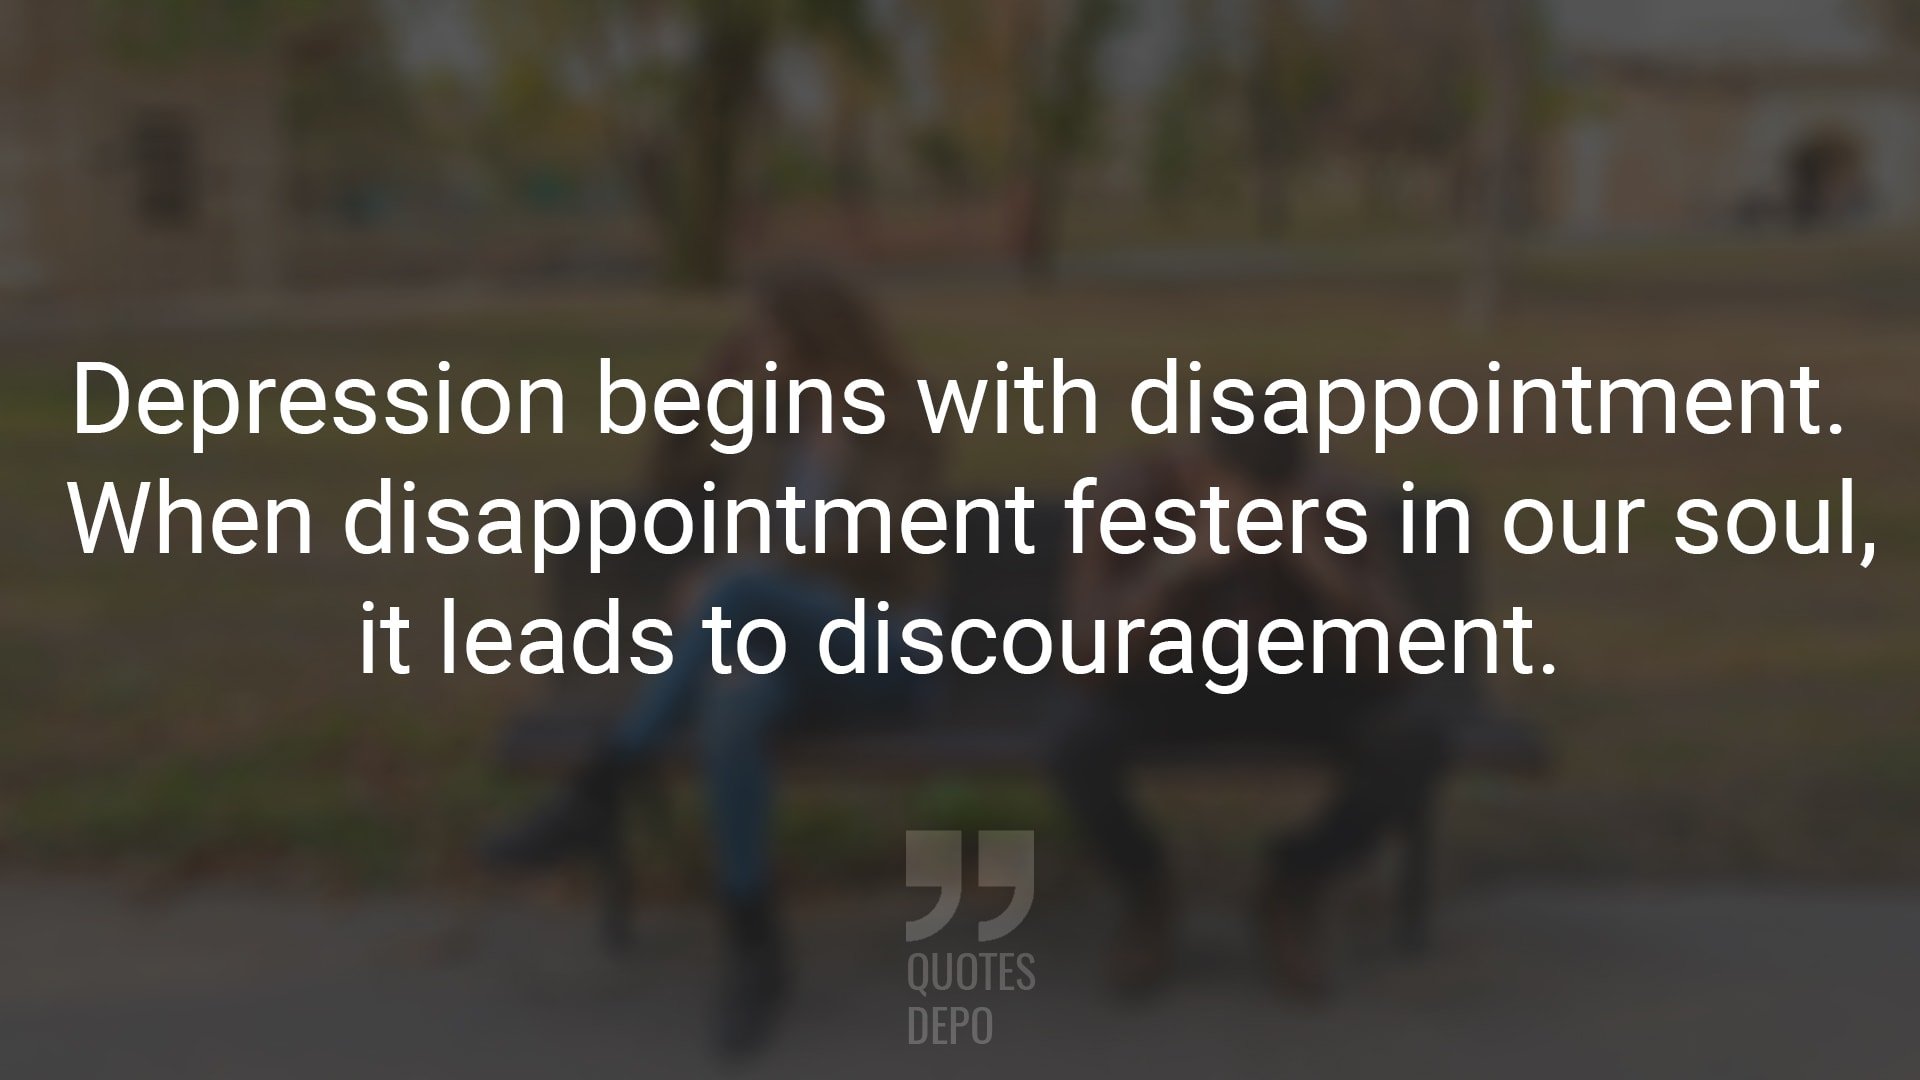 Depression Begins with Disappointment